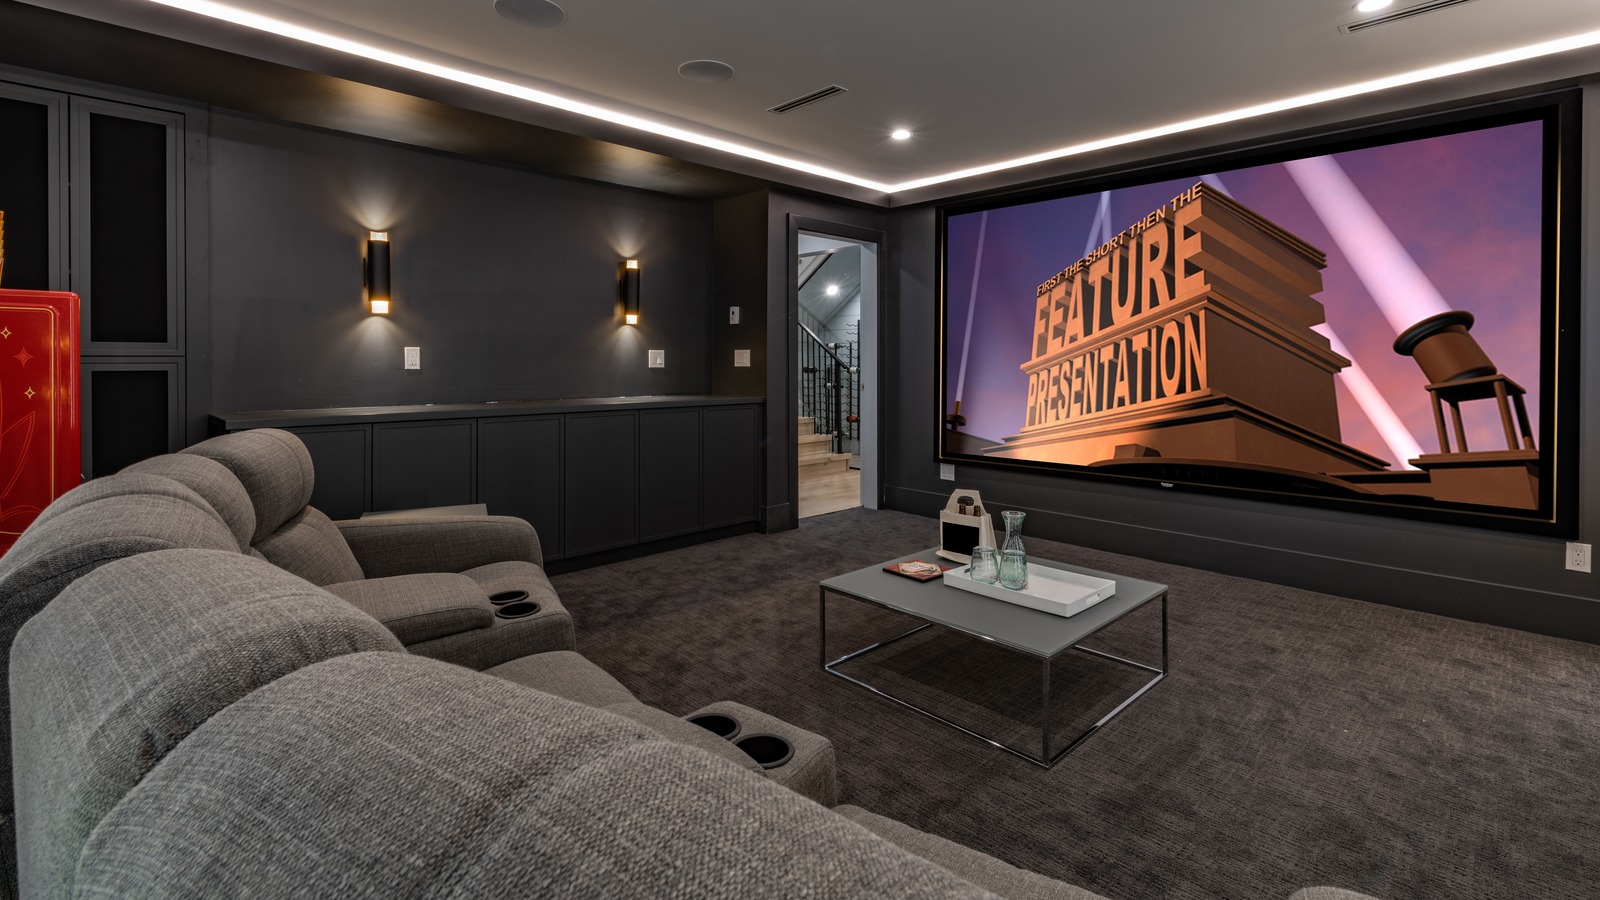 Do Home Theaters Increase The Value Of Your Home?